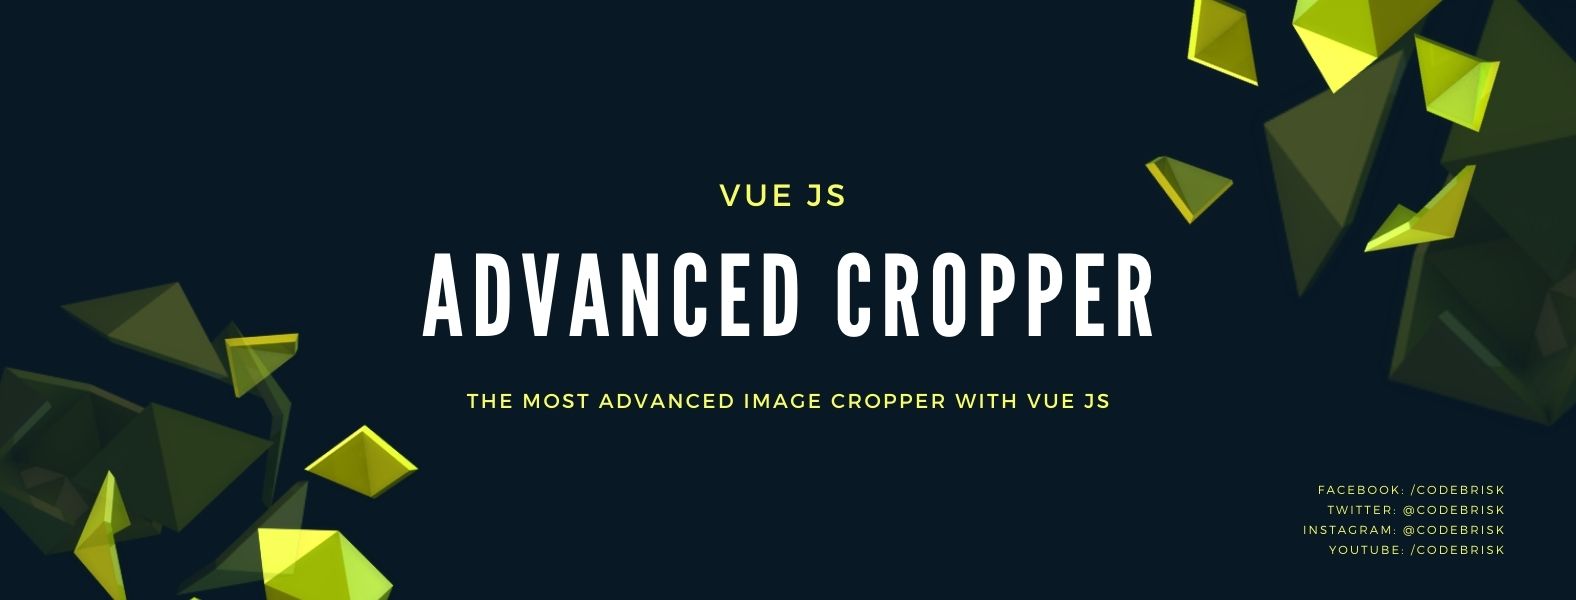 The Most Advanced Image Cropper With Vue Js